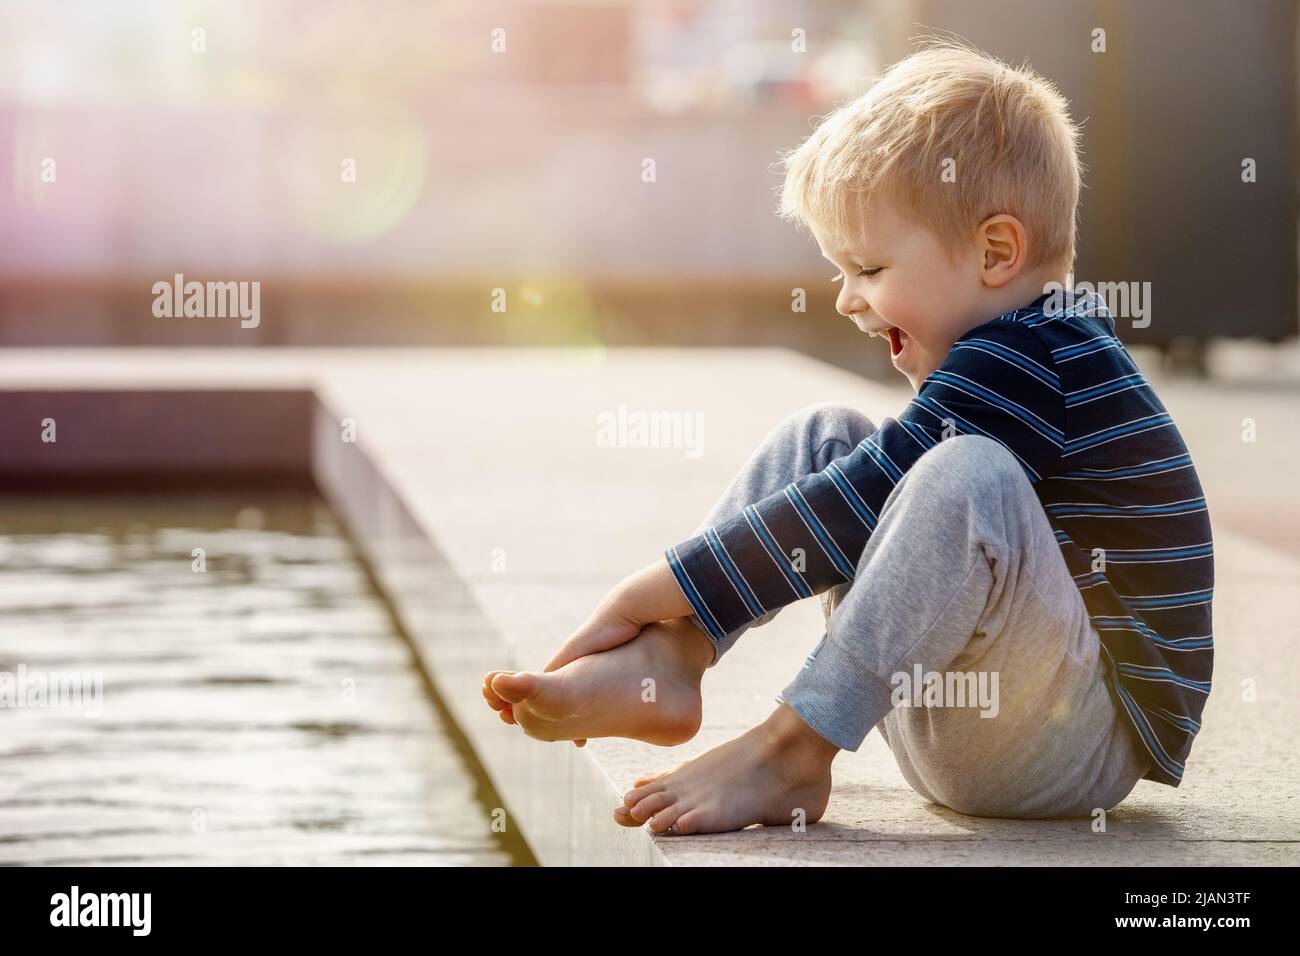 Boy having fun in water fountains. Child playing with a city fountain on hot summer day. Happy kid having fun in fountain. Summer weather. The child i Stock Photo